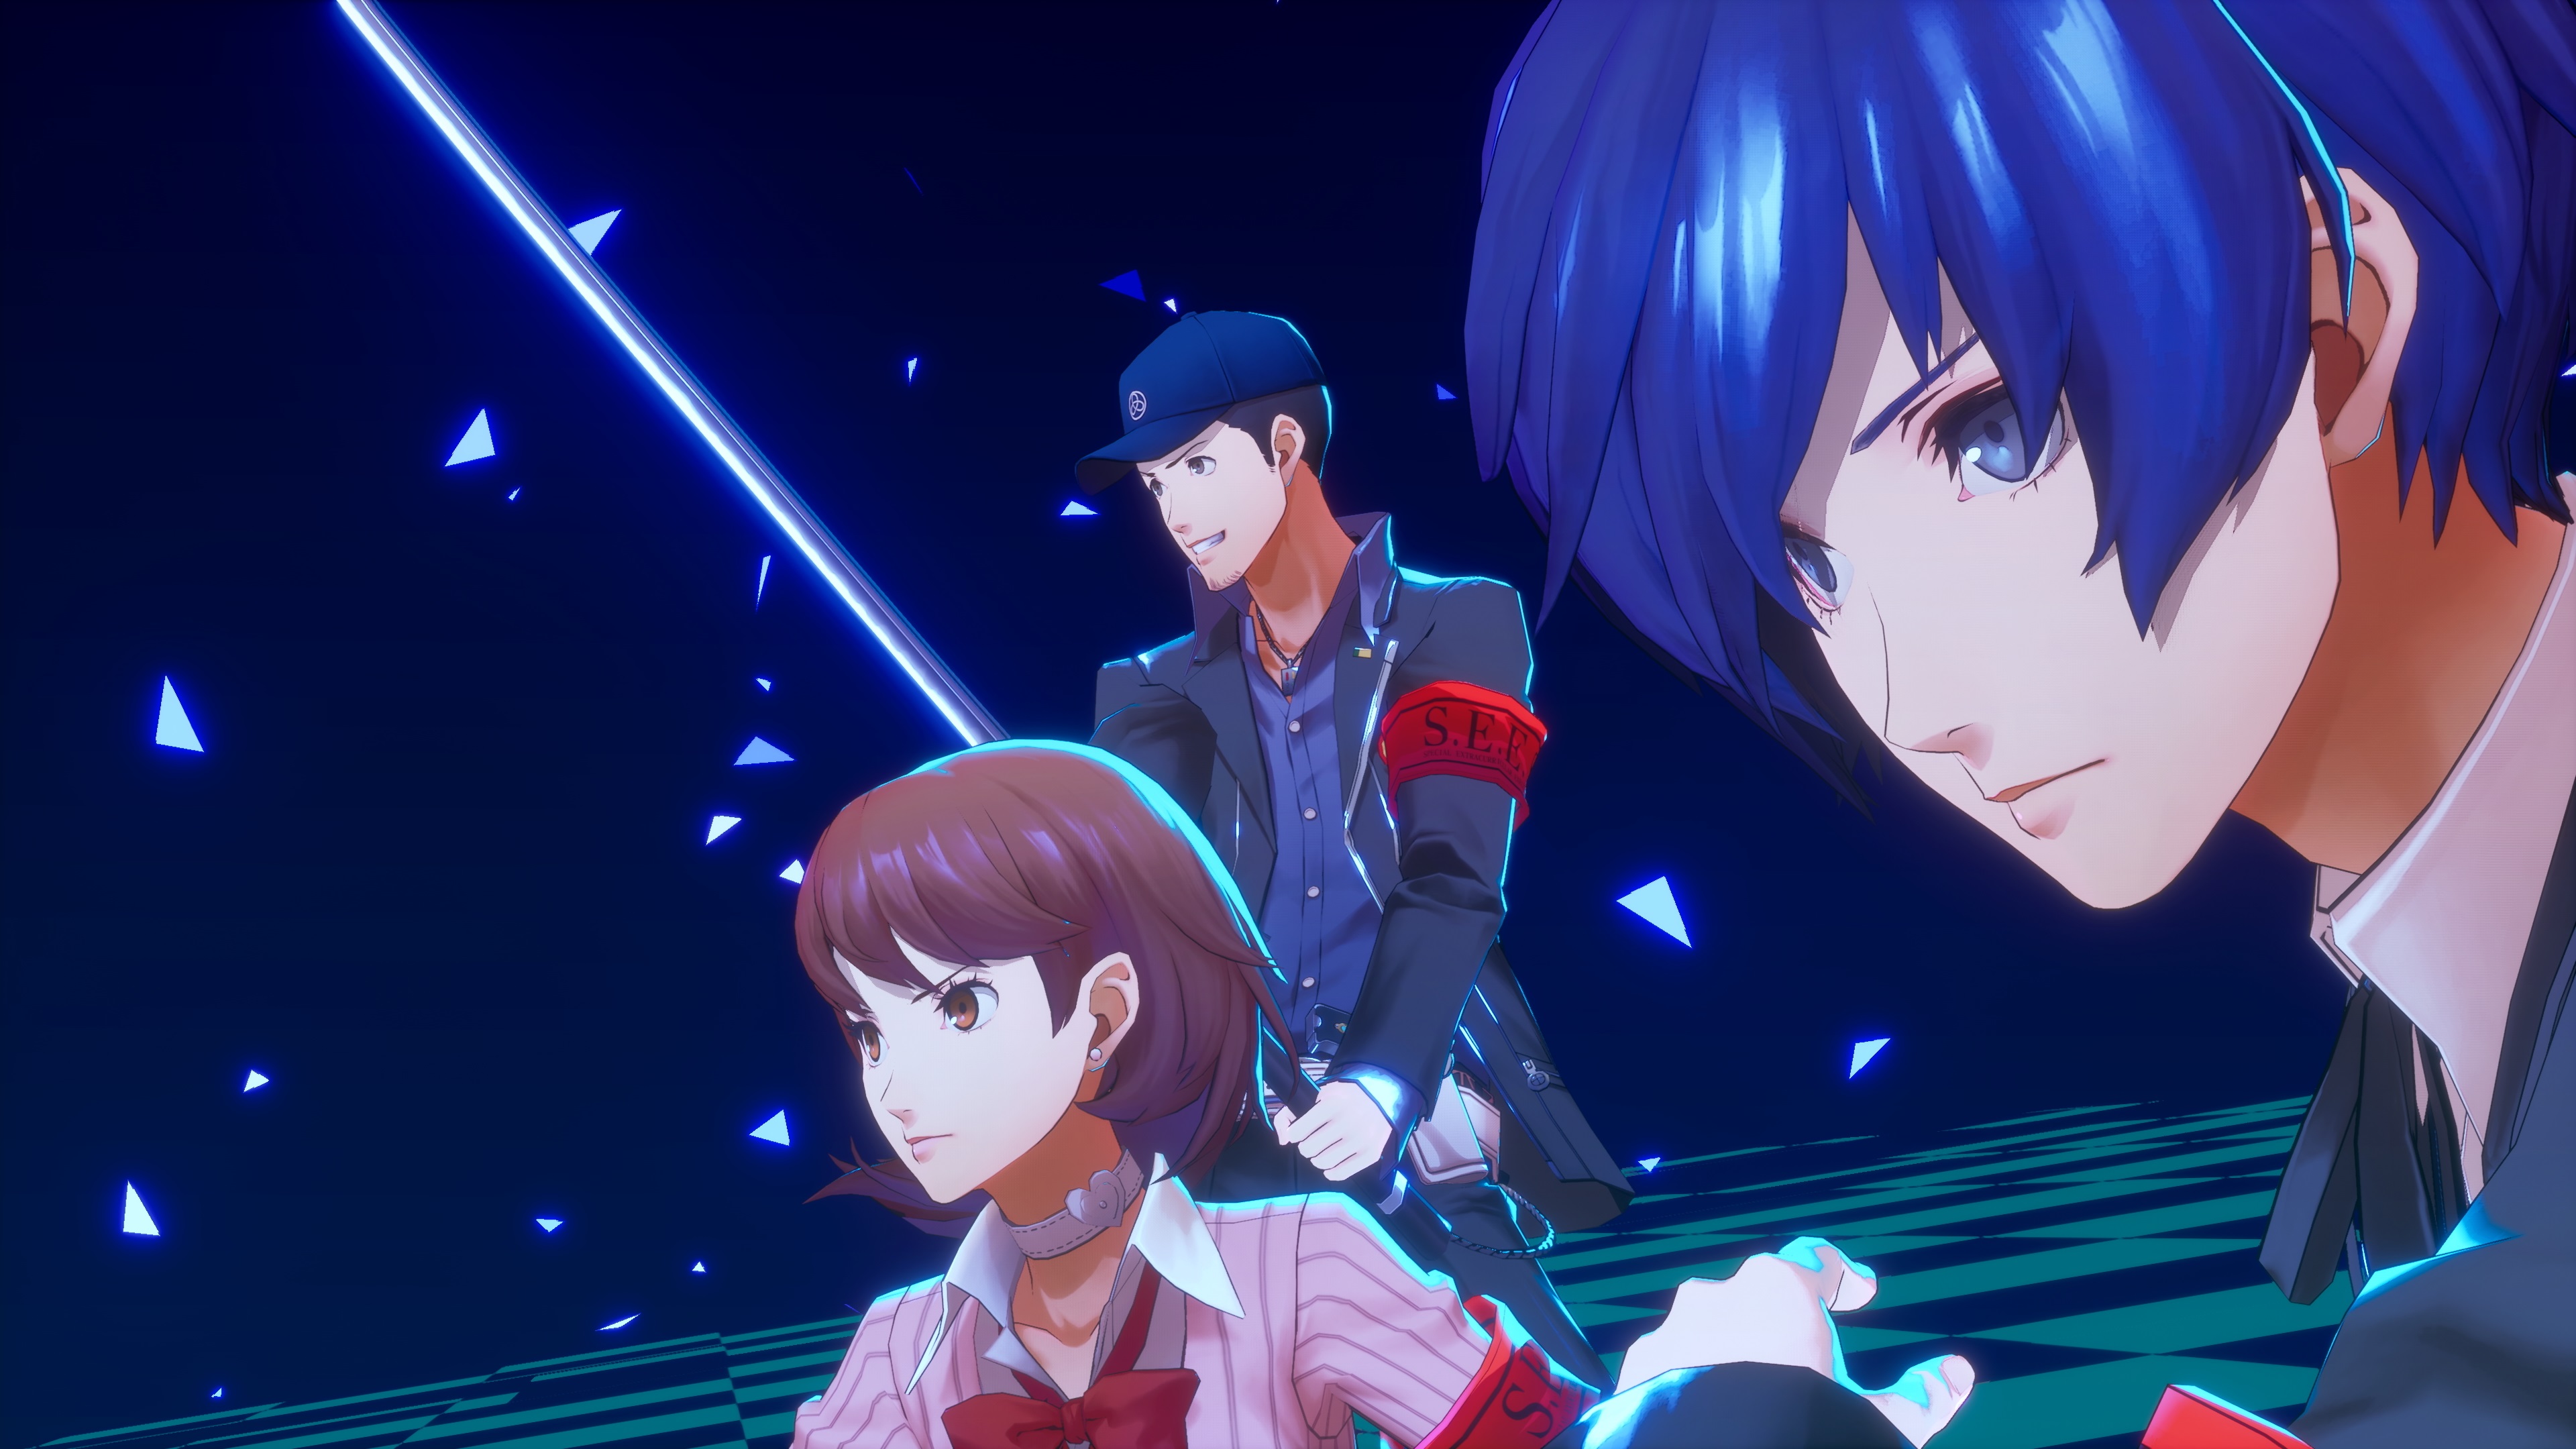 Persona 3 Reload Character Profiles and New Screenshots Shared